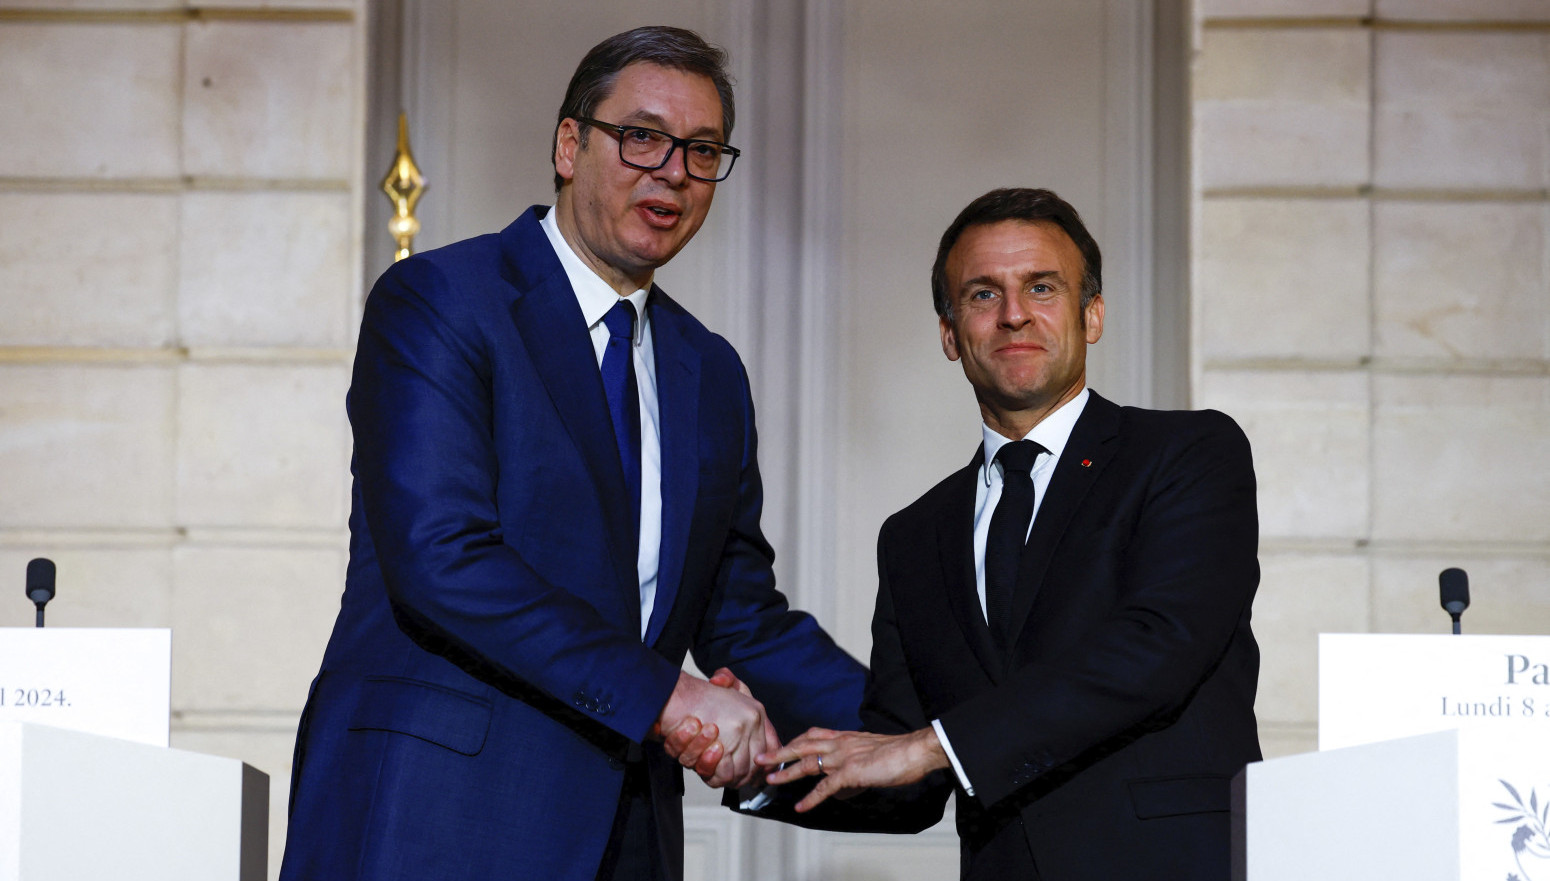 Vučić and Macron in front of the Elysée Palace: "We counted on France the most" VIDEO